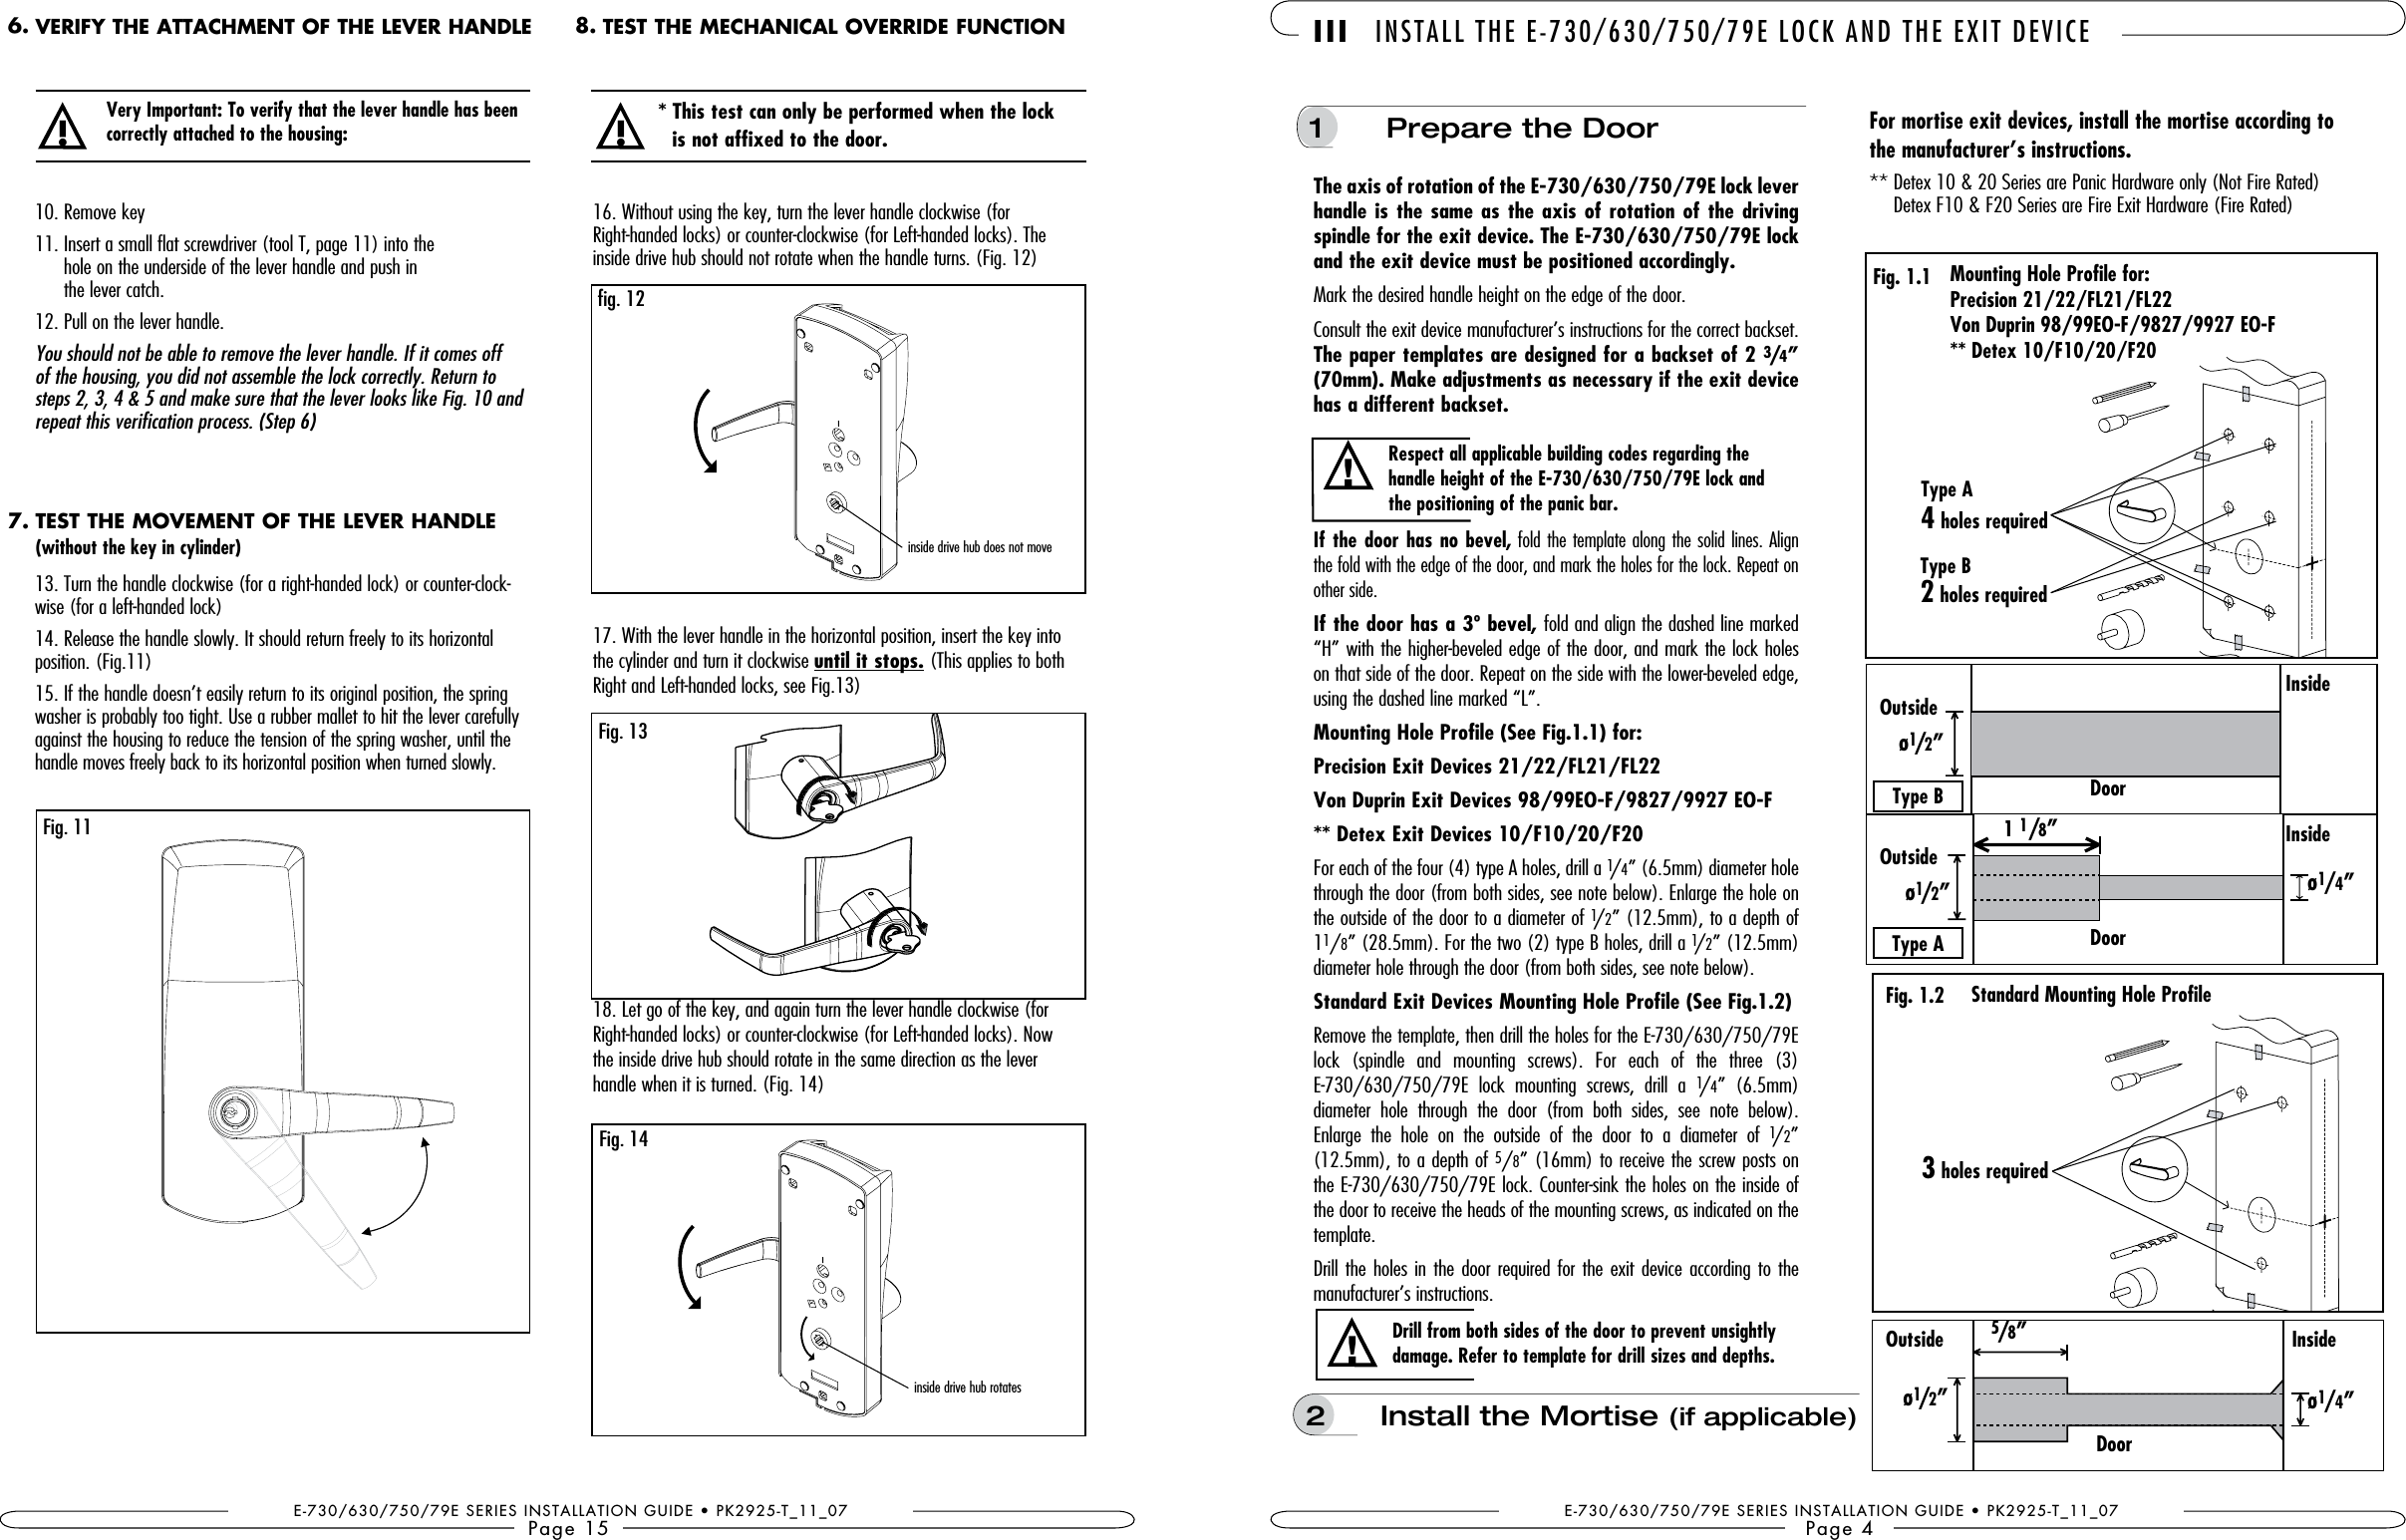 E-730/630/750/79E SERIES INSTALLATION GUIDE • PK2925-T_11_07Page 1513. Turn the handle clockwise (for a right-handed lock) or counter-clock-wise (for a left-handed lock)14. Release the handle slowly. It should return freely to its horizontal  position. (Fig.11)15. If the handle doesn’t easily return to its original position, the spring washer is probably too tight. Use a rubber mallet to hit the lever carefully against the housing to reduce the tension of the spring washer, until the handle moves freely back to its horizontal position when turned slowly.10. Remove key11.  Insert a small flat screwdriver (tool T, page 11) into the  hole on the underside of the lever handle and push in the lever catch.12. Pull on the lever handle. You should not be able to remove the lever handle. If it comes off of the housing, you did not assemble the lock correctly. Return to steps 2, 3, 4 &amp; 5 and make sure that the lever looks like Fig. 10 and repeat this verification process. (Step 6)!correctly attached to the housing: Fig. 1116. Without using the key, turn the lever handle clockwise (for  Right-handed locks) or counter-clockwise (for Left-handed locks). The  inside drive hub should not rotate when the handle turns. (Fig. 12)17. With the lever handle in the horizontal position, insert the key into the cylinder and turn it clockwise until it stops. (This applies to both Right and Left-handed locks, see Fig.13) 18. Let go of the key, and again turn the lever handle clockwise (for Right-handed locks) or counter-clockwise (for Left-handed locks). Now  the inside drive hub should rotate in the same direction as the lever  handle when it is turned. (Fig. 14)!* This test can only be performed when the lock  Fig. 13Fig. 14inside drive hub rotates fig. 12inside drive hub does not moveVERIFY THE ATTACHMENT OF THE LEVER HANDLE6. TEST THE MECHANICAL OVERRIDE FUNCTION8.TEST THE MOVEMENT OF THE LEVER HANDLE(without the key in cylinder)7.the manufacturer’s instructions. **  Detex 10 &amp; 20 Series are Panic Hardware only (Not Fire Rated) Detex F10 &amp; F20 Series are Fire Exit Hardware (Fire Rated)Drill from both sides of the door to prevent unsightly damage. Refer to template for drill sizes and depths.!1   Prepare the DoorMark the desired handle height on the edge of the door. Consult the exit device manufacturer’s instructions for the correct backset. The paper templates are designed for a backset of 2 34” has a different backset. If the door has no bevel, fold the template along the solid lines. Align the fold with the edge of the door, and mark the holes for the lock. Repeat on other side.If the door has a 3º bevel, fold and align the dashed line marked “H” with the higher-beveled edge of the door, and mark the lock holes on that side of the door. Repeat on the side with the lower-beveled edge, using the dashed line marked “L”.Mounting Hole Profile (See Fig.1.1) for:For each of the four (4) type A holes, drill a 1/4” (6.5mm) diameter hole through the door (from both sides, see note below). Enlarge the hole on the outside of the door to a diameter of 1/2” (12.5mm), to a depth of 11/8” (28.5mm). For the two (2) type B holes, drill a 1/2” (12.5mm) diameter hole through the door (from both sides, see note below).Remove the template, then drill the holes for the E-730/630/750/79E lock  (spindle  and  mounting  screws).  For  each  of  the  three  (3) E-730/630/750/79E  lock  mounting  screws,  drill  a  1/4”  (6.5mm) diameter  hole  through  the  door  (from  both  sides,  see  note  below). Enlarge  the  hole  on  the  outside  of  the  door  to  a  diameter  of  1/2” (12.5mm), to a depth of 5/8” (16mm) to receive the screw posts on the E-730/630/750/79E lock. Counter-sink the holes on the inside of the door to receive the heads of the mounting screws, as indicated on the template.Drill the  holes in the door required  for the exit device according to the  manufacturer’s instructions. III INSTALL THE E-730/630/750/79E LOCK AND THE EXIT DEVICEE-730/630/750/79E SERIES INSTALLATION GUIDE • PK2925-T_11_07Page 4Respect all applicable building codes regarding the the positioning of the panic bar.!Standard Mounting Hole Profile5 ”ø12”ø14”ø14”OutsideFig. 1.2Fig. 1.1InsideDoorMounting Hole Profile for:Type A 4 holes requiredType B 2 holes required3 holes requiredø12”OutsideInsideDoorø12”OutsideInsideDoorType BType A1 1”2  Install the Mortise (if applicable)